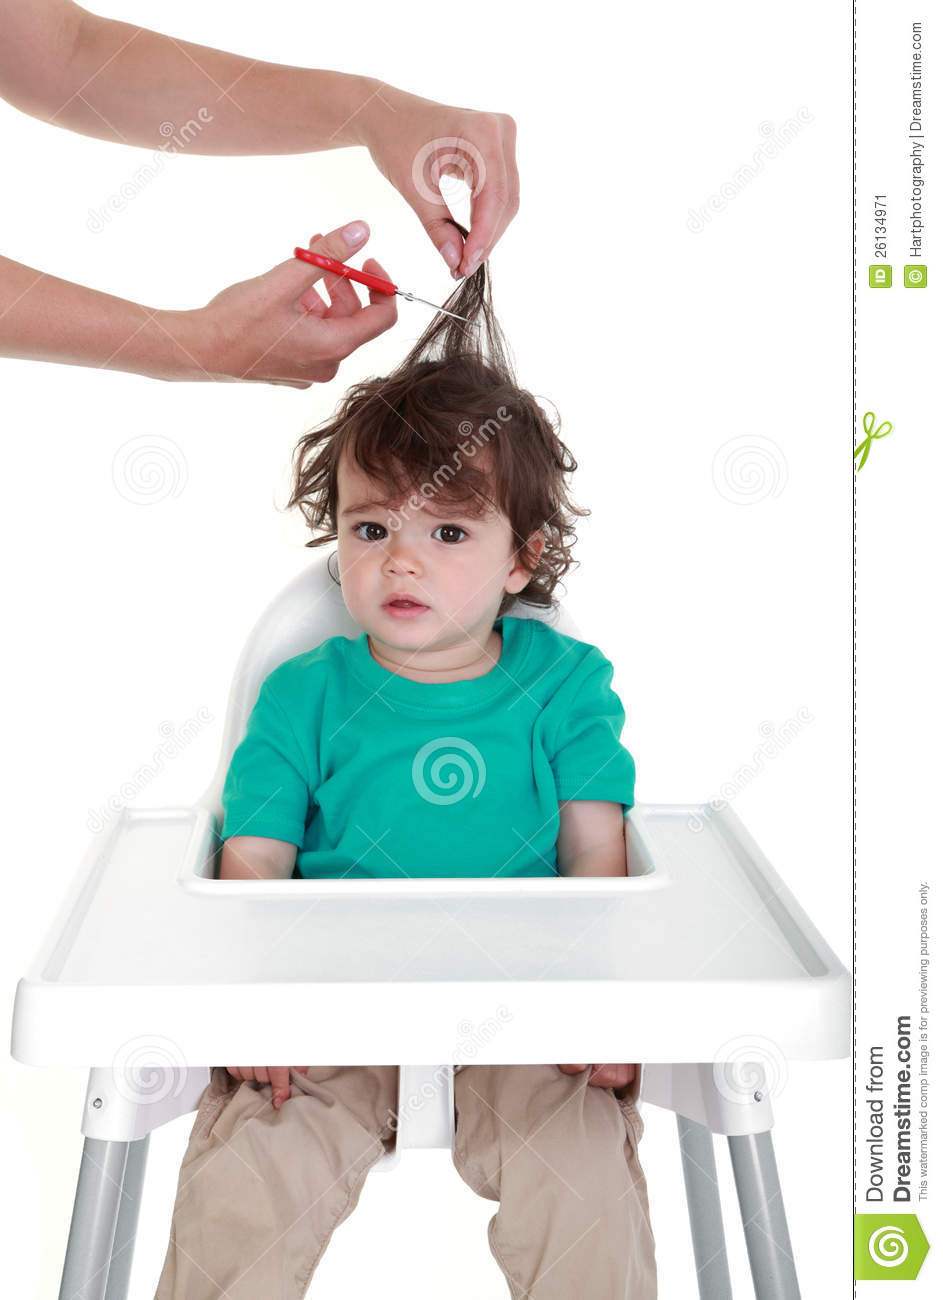 Baby S First Haircut Stock Image   Image  26134971